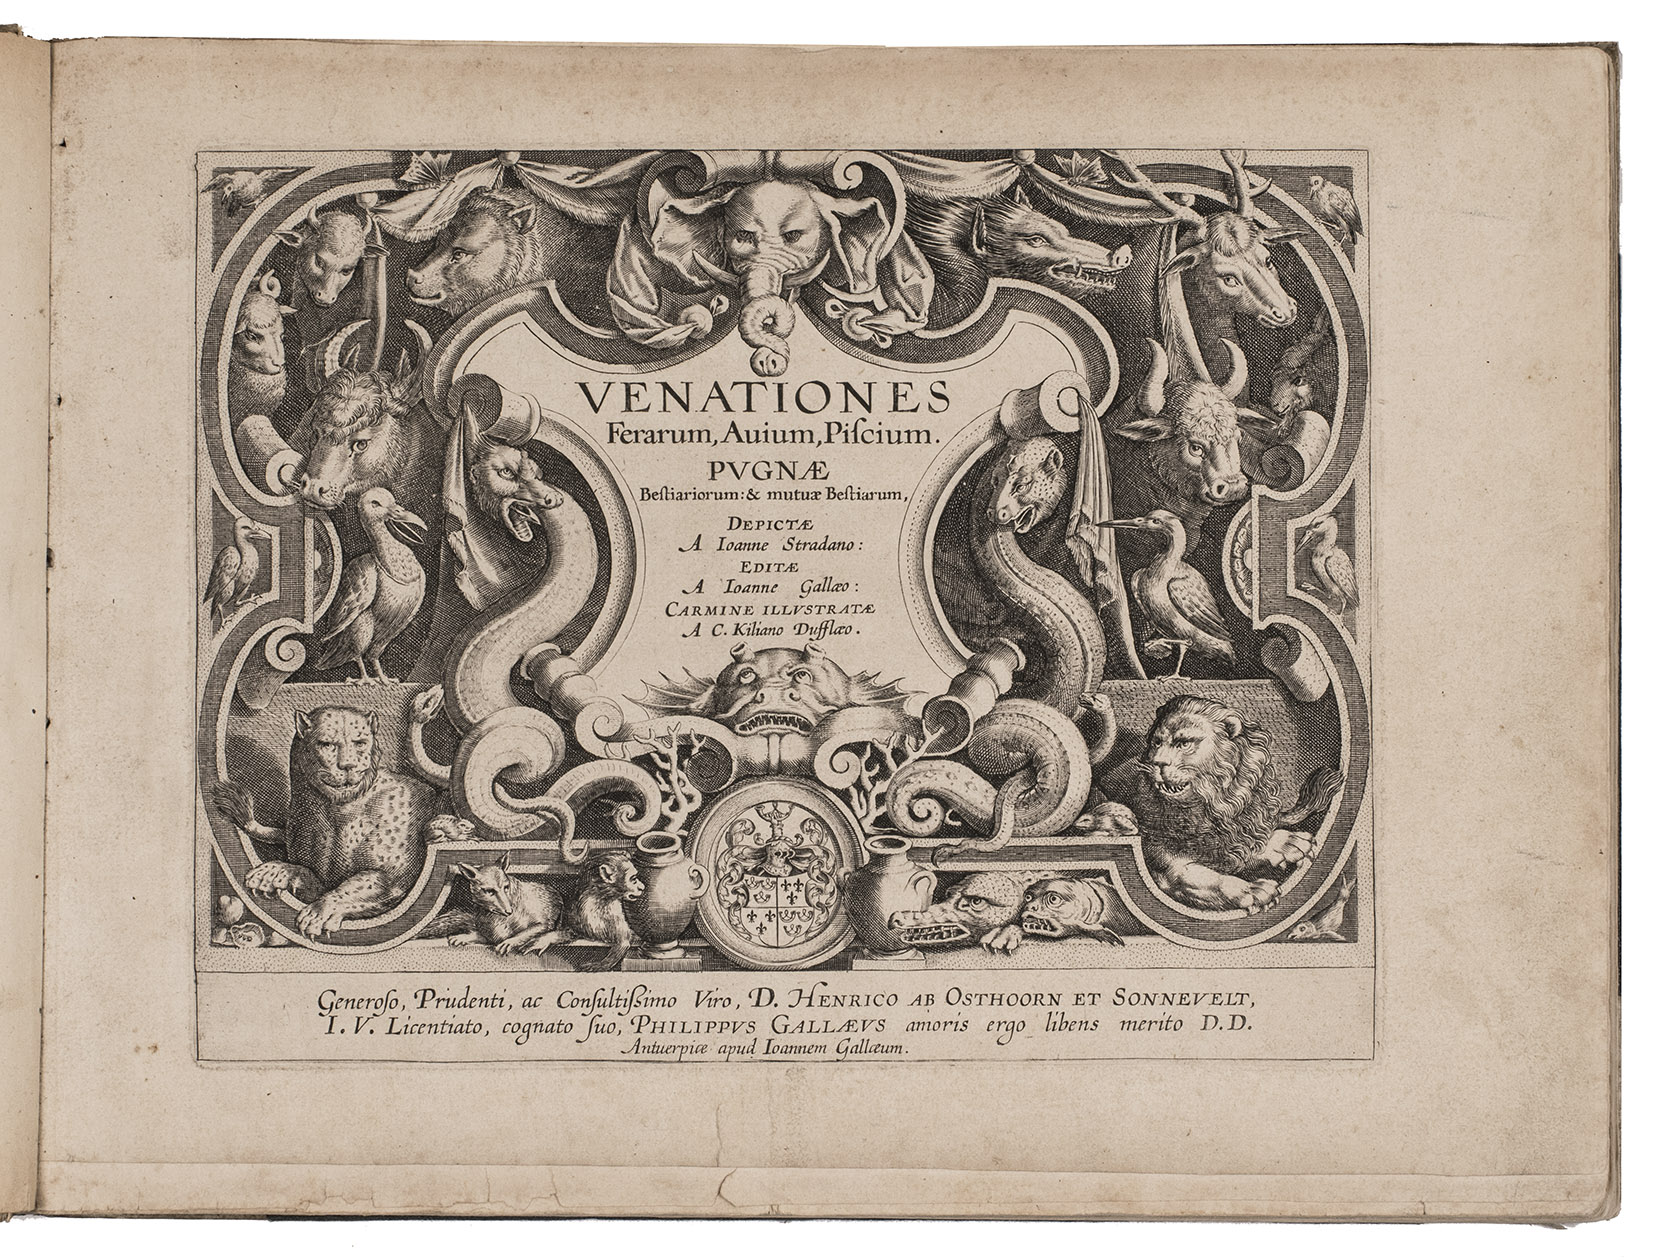 STRADANUS, Johannes (Jan van der STRAET). - Venationes ferarum, avium, piscium. Pugnae bestiariorum: & mutuae bestiarum, ...Antwerp, Johannes Galle, ca. 1665/75 [engraved 1578-ca. 1596/1612]. Oblong 1mo (26.5 x 36 cm). With an engraved title-print and 104 numbered engraved prints (plate size 21.5 x 29.5 cm; image size 20.5 x 29.5 cm), each with a verse caption in 2 columns in the foot of the plate (mostly 4 lines, occasionally 2 lines). Half parchment (ca. 1880?).